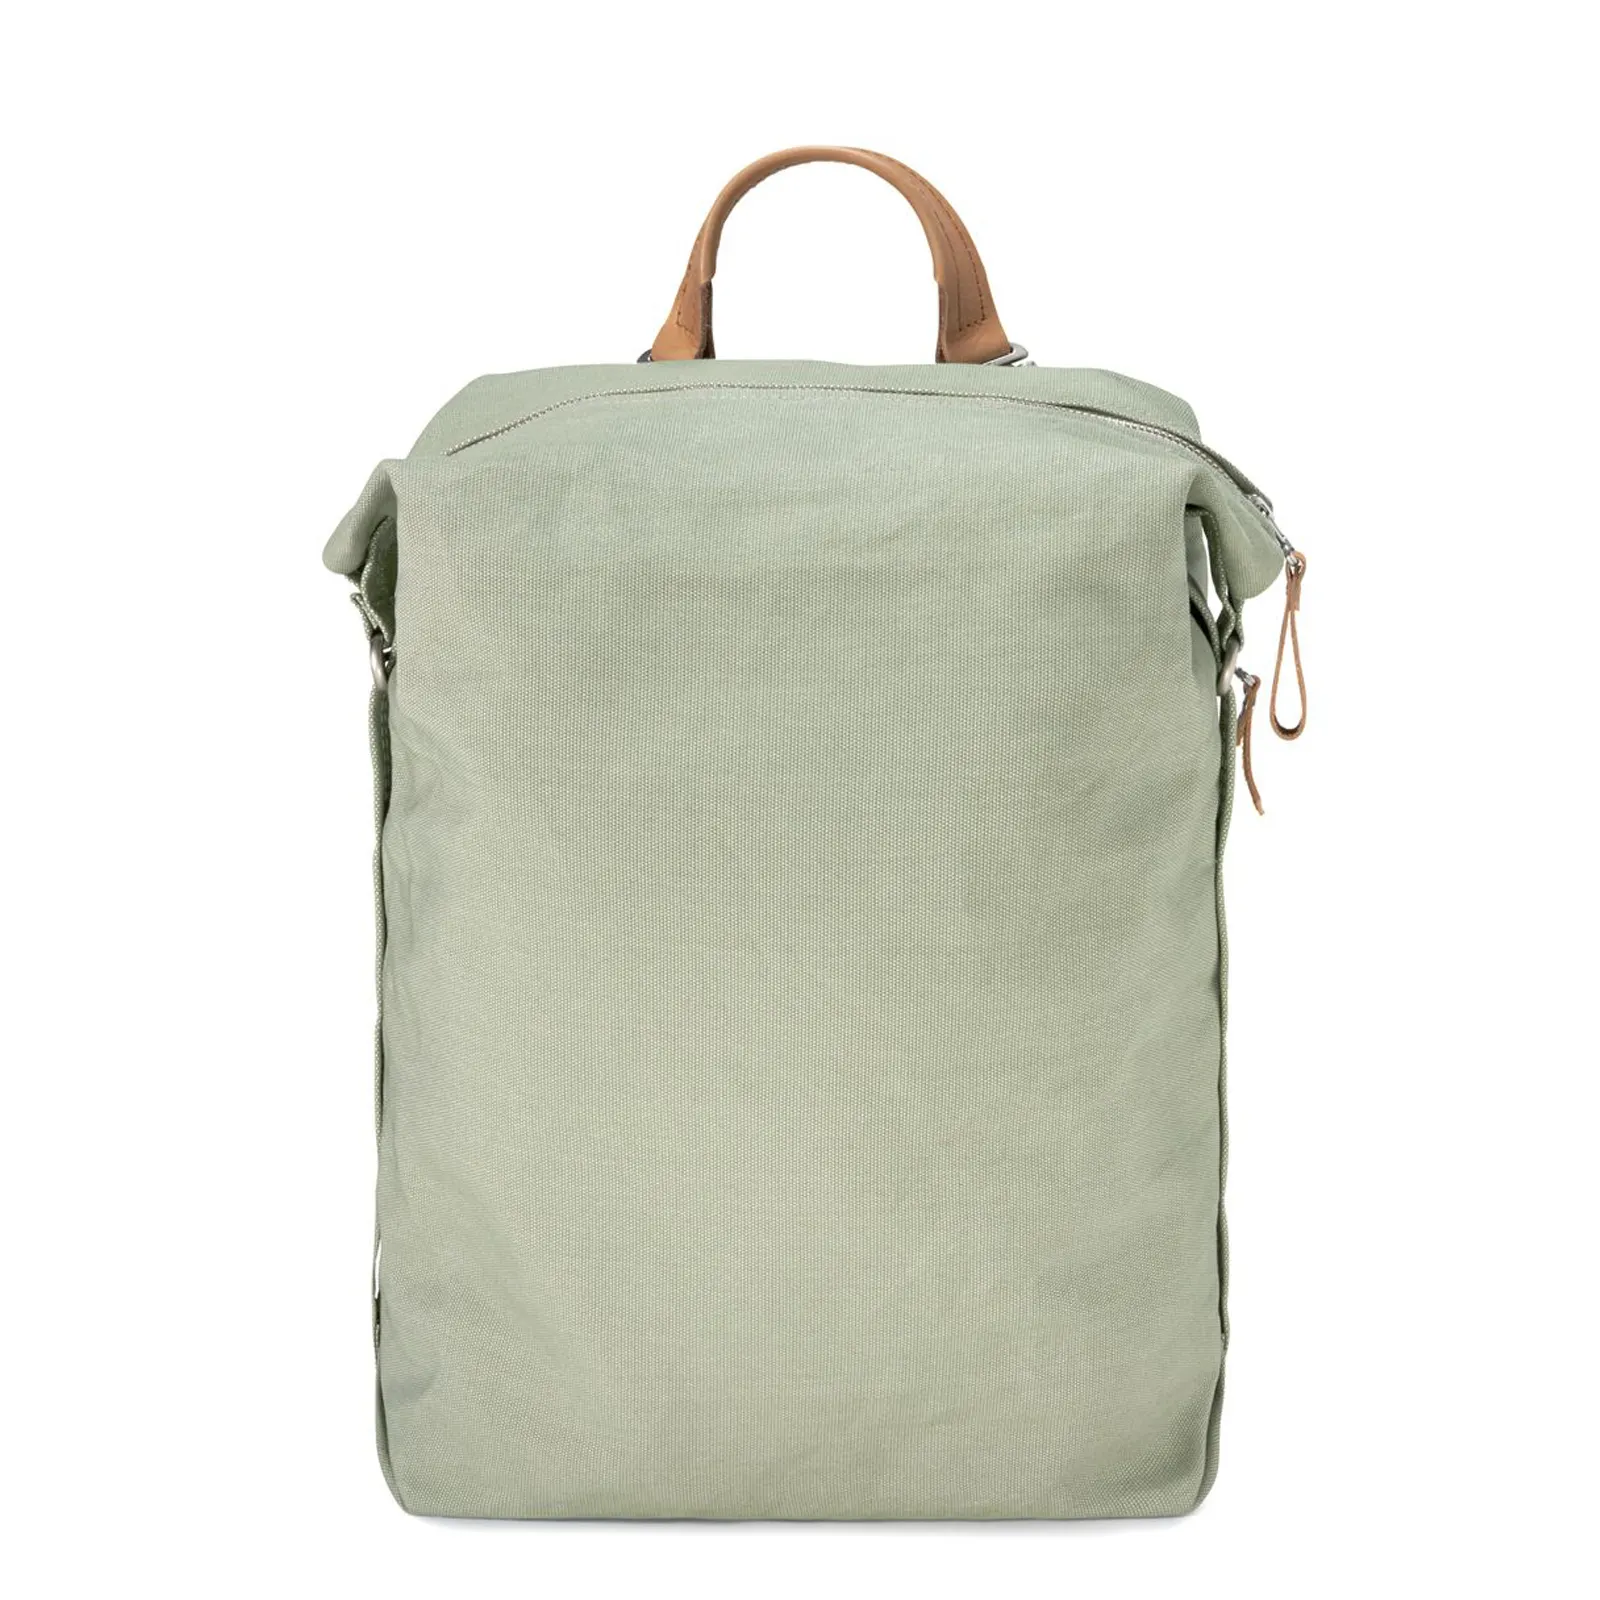 New Design backpack Banana fabric ECD-Friendly fashional for man and woman in all seasons